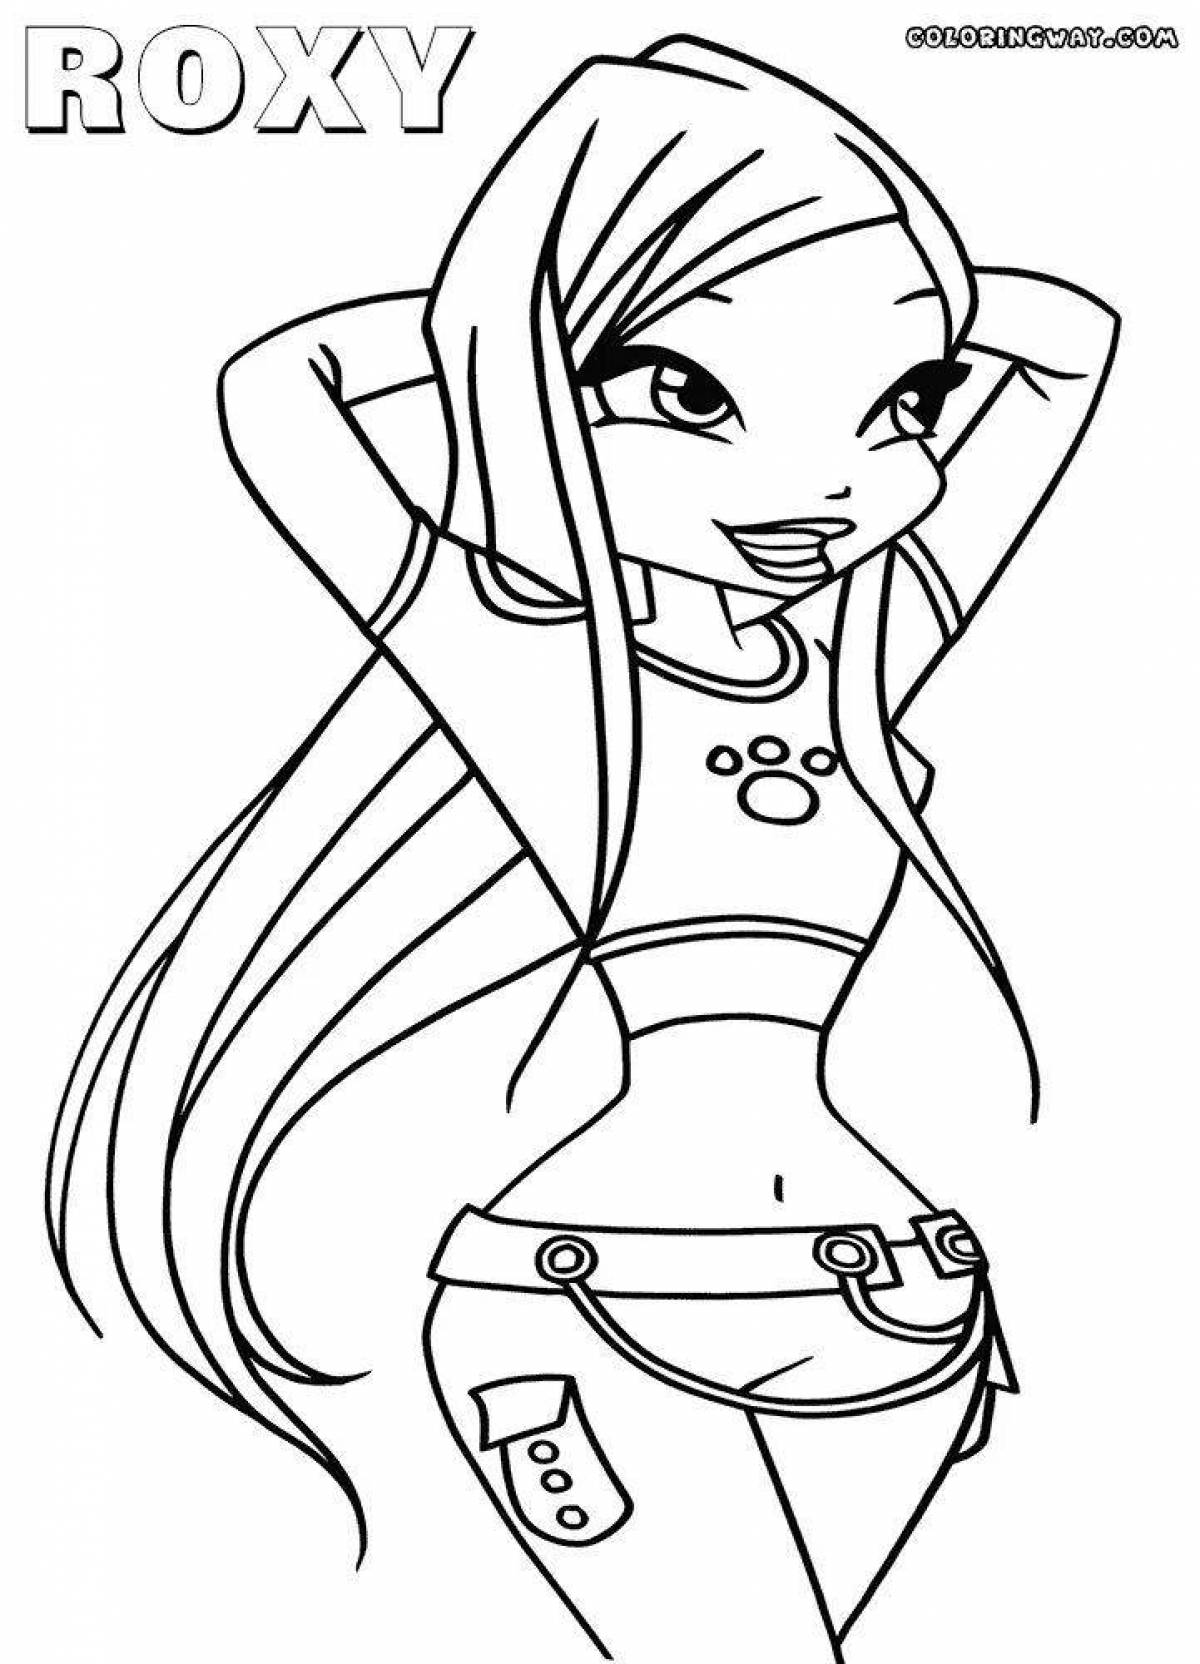 Roxy live coloring page